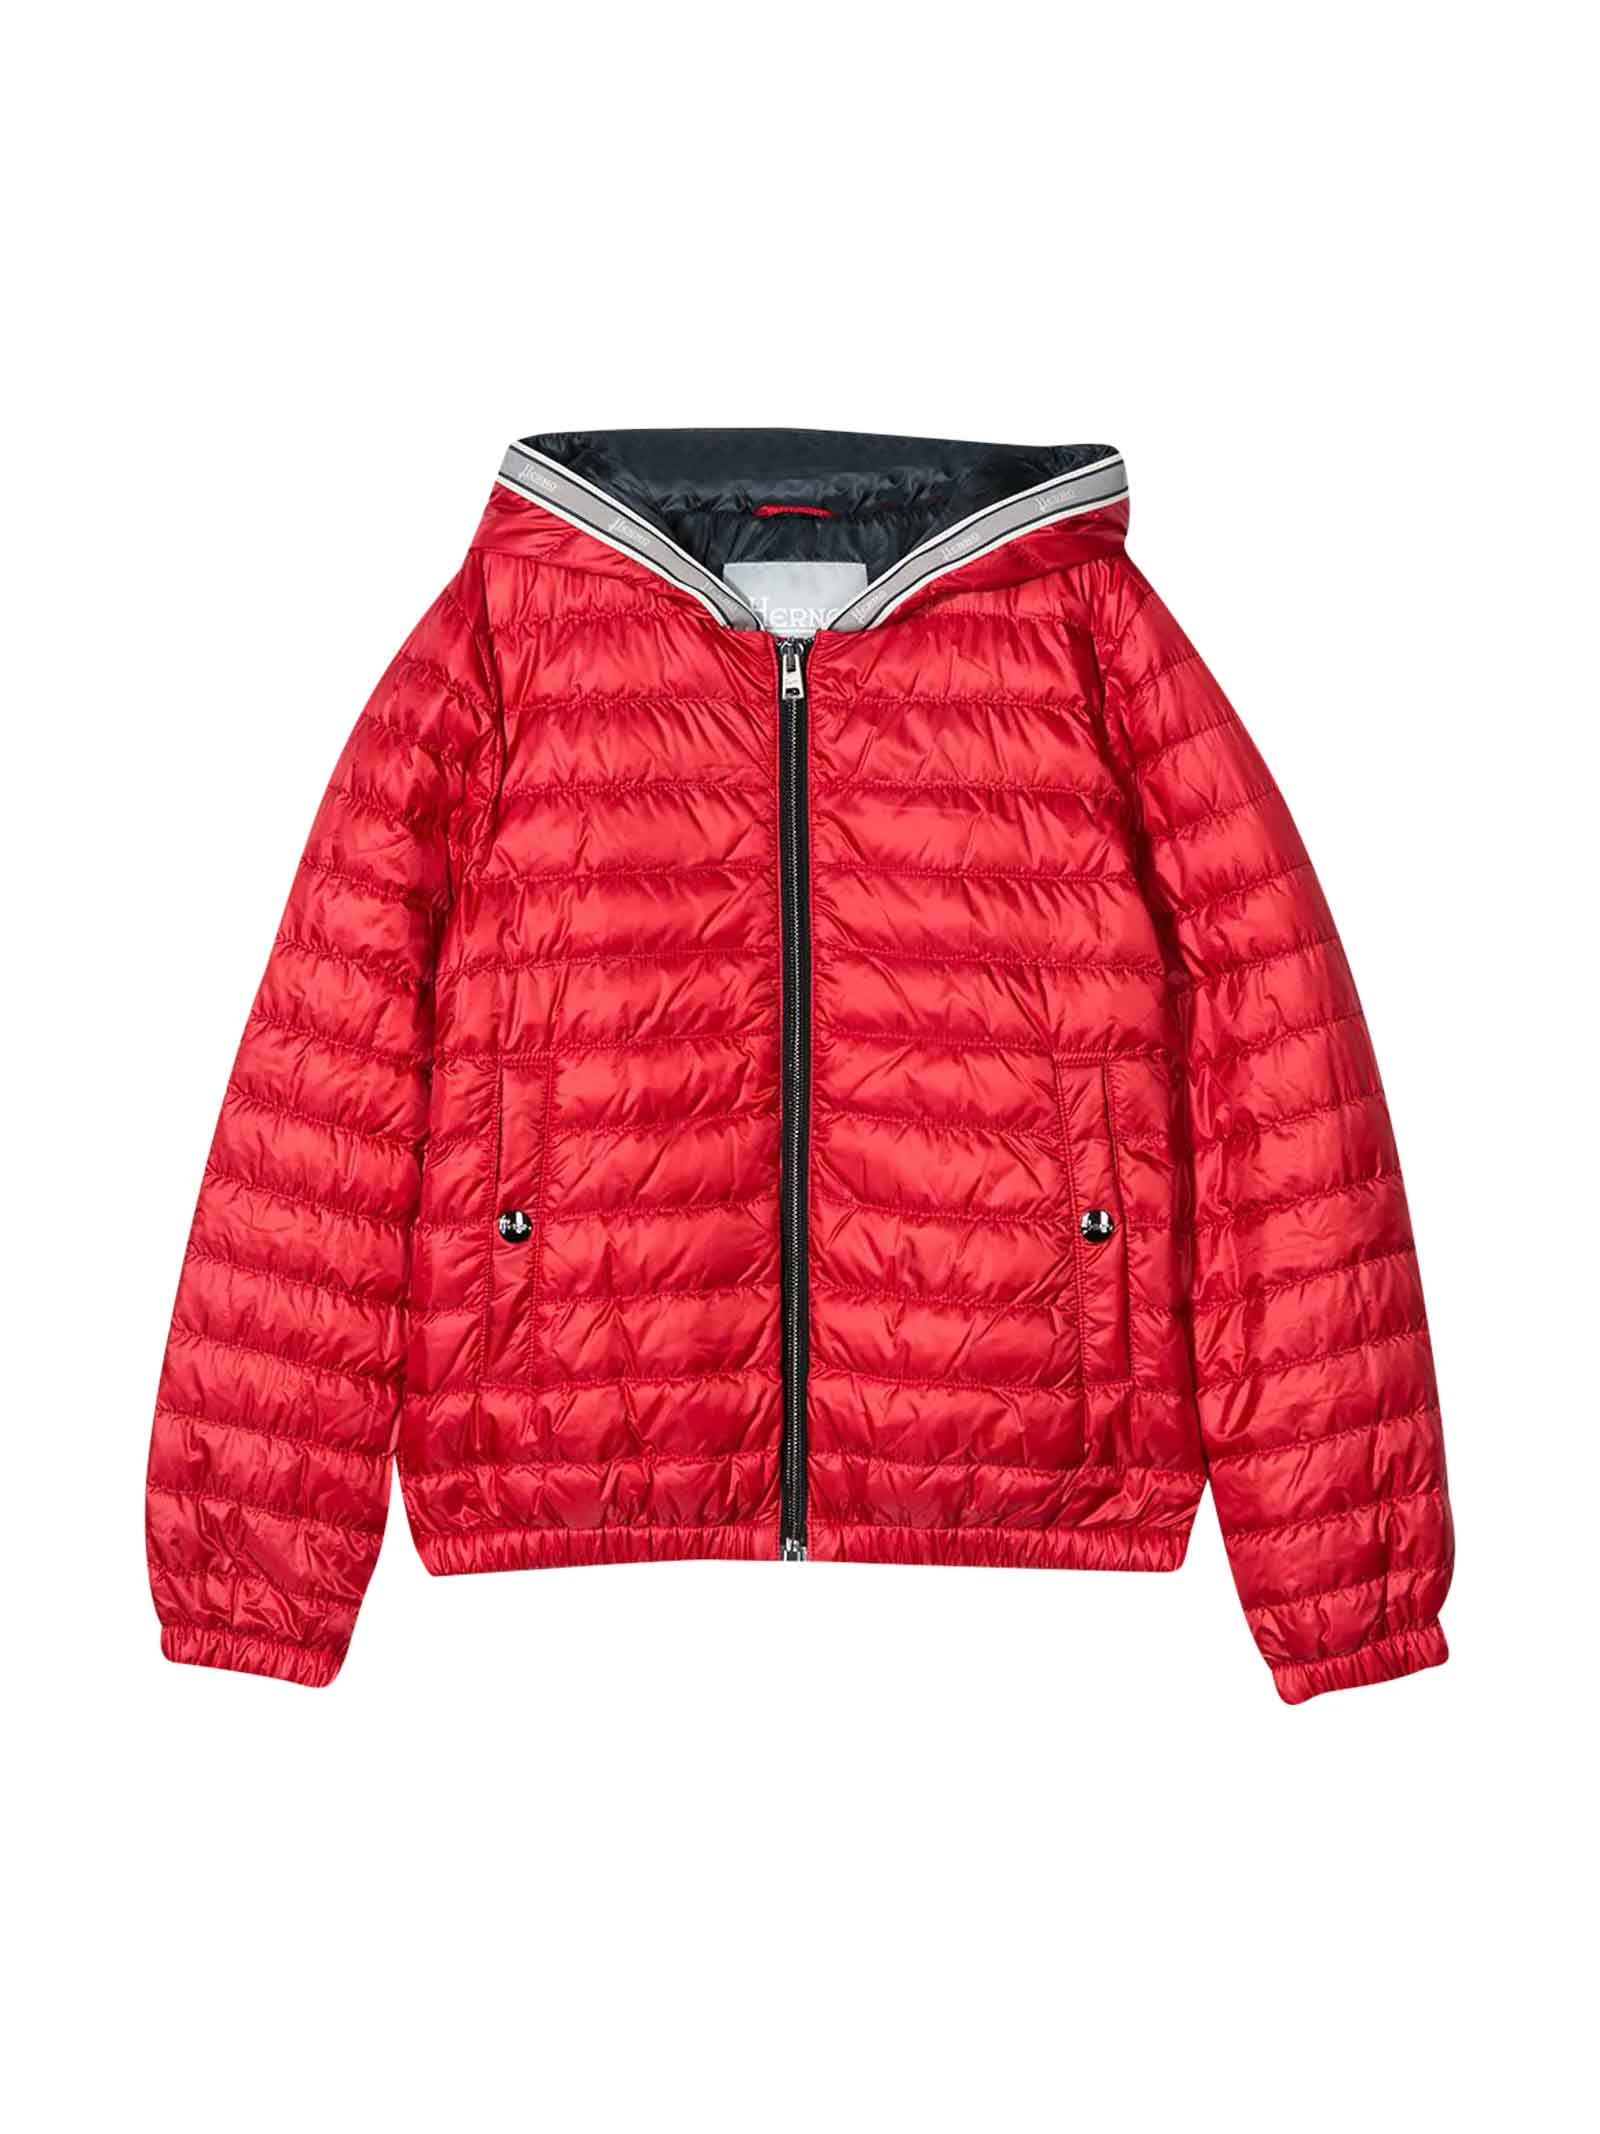 HERNO RED PADDED JACKET,11310485